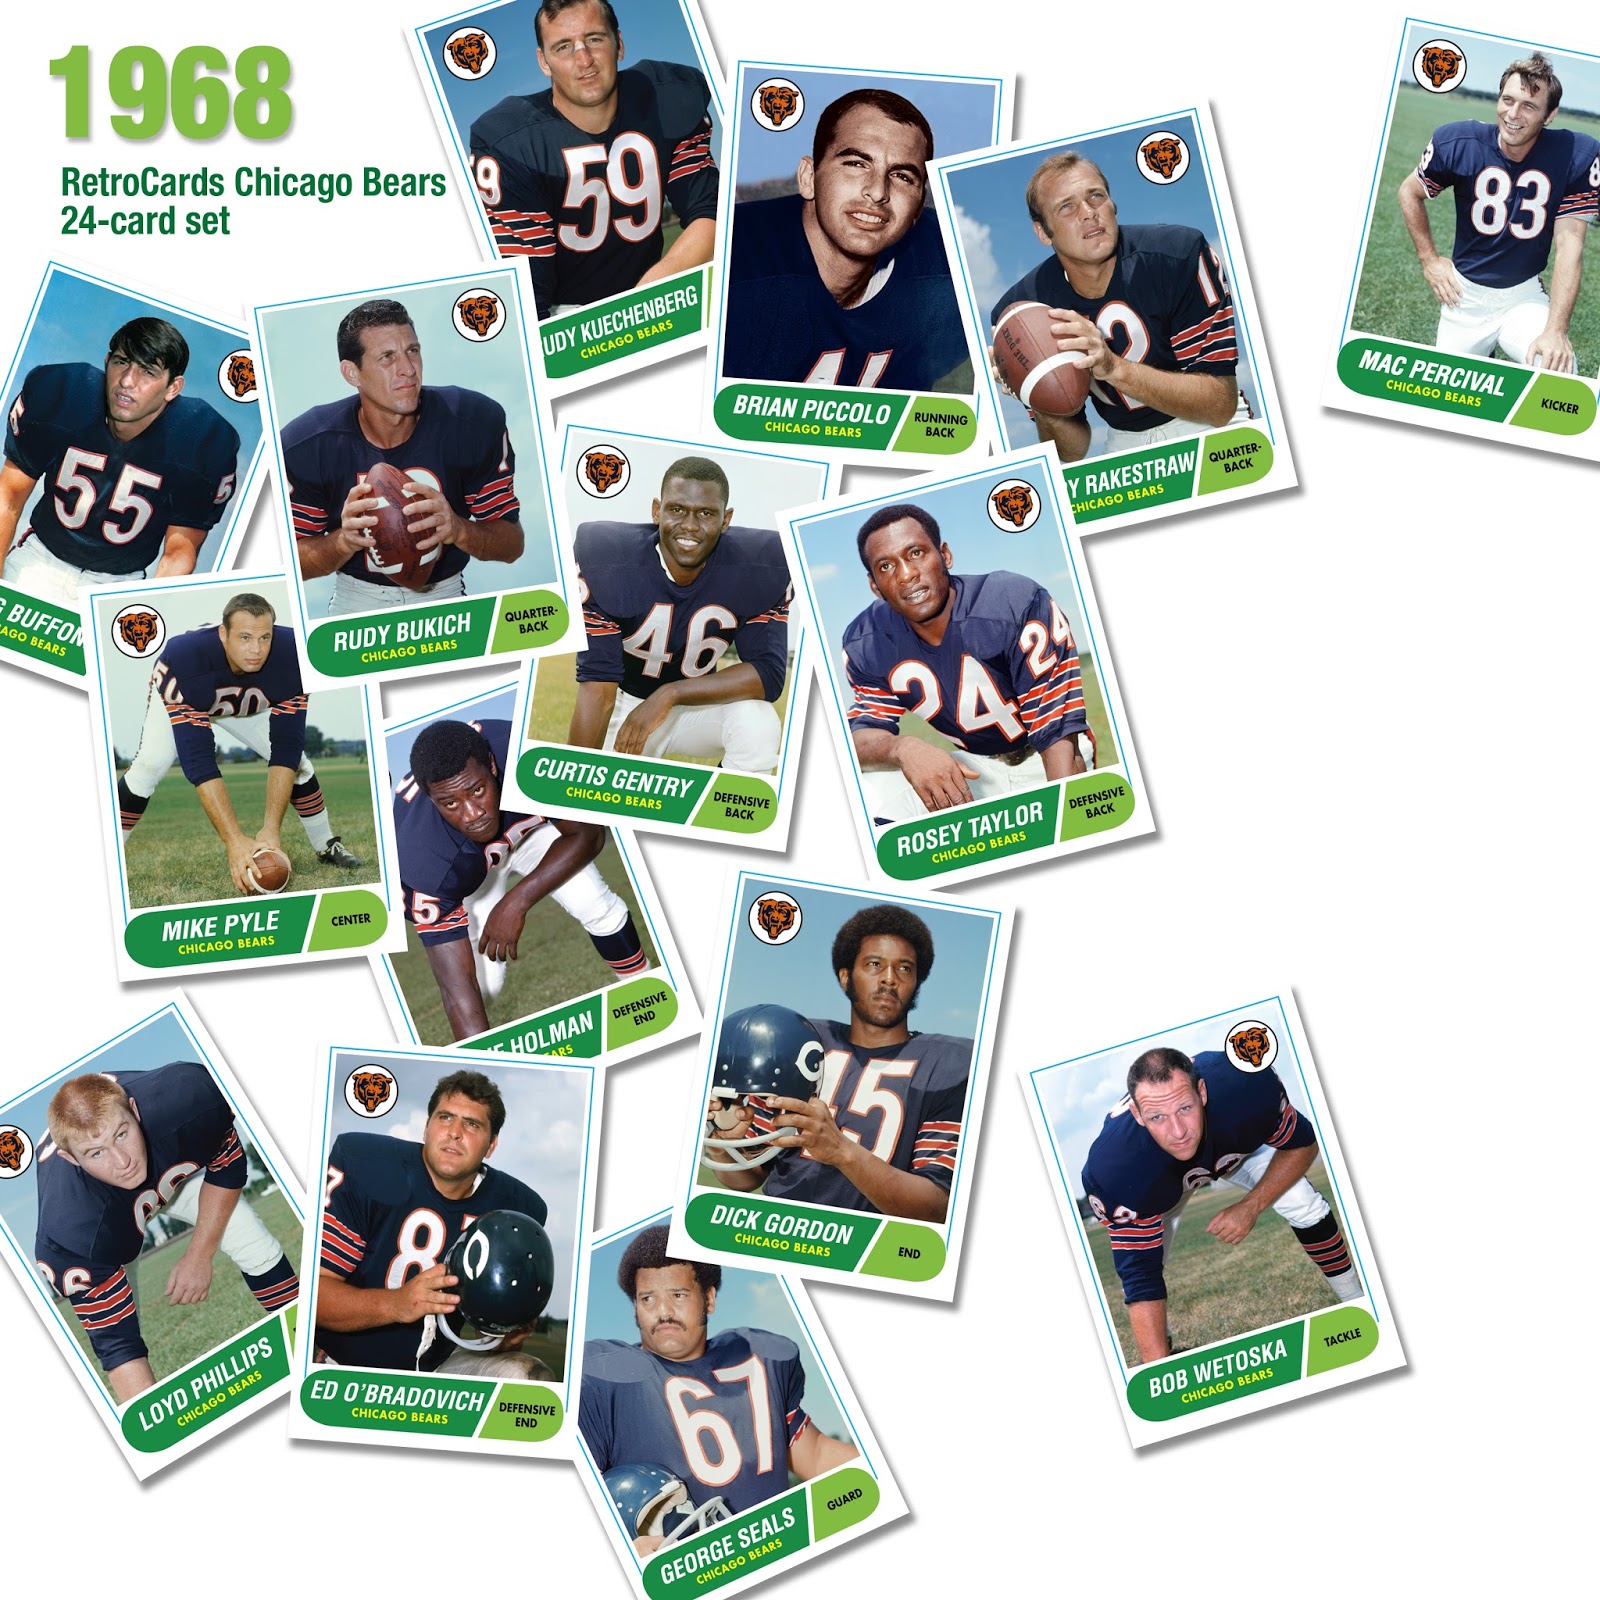 Custom Sports Cards by RetroCards: 1968 Bears: More Lean Years To Come